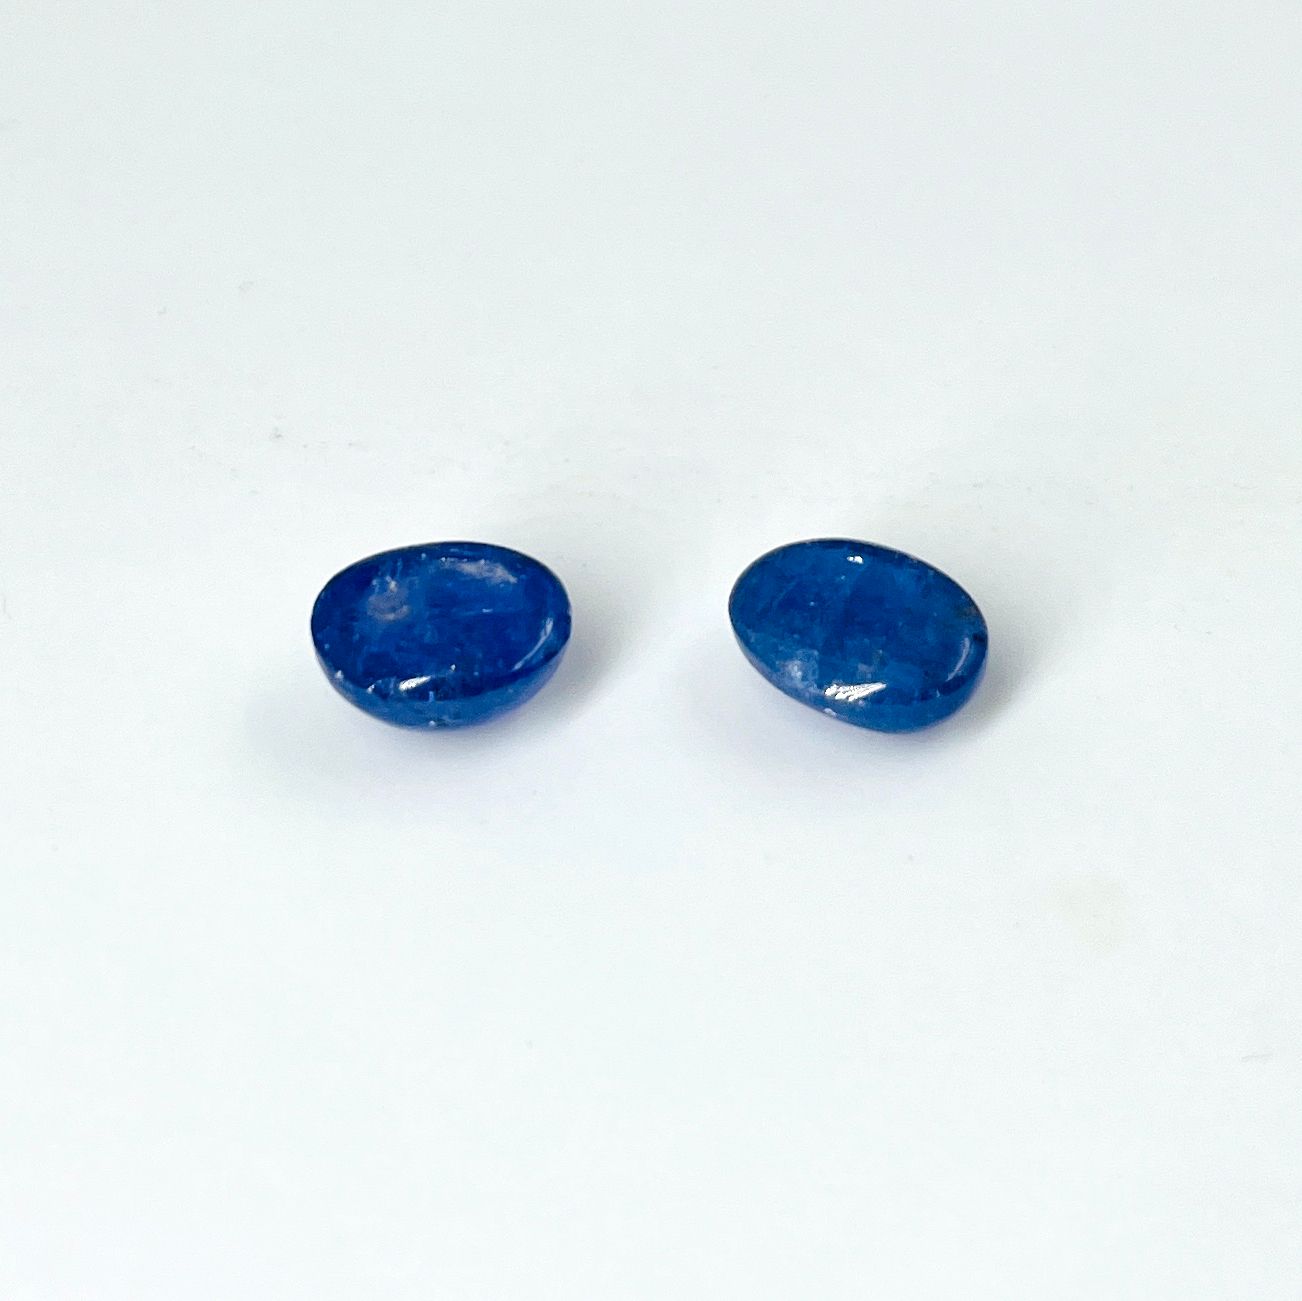 Null Lot of two tanzanite cabochons weighing 16.74 cts total